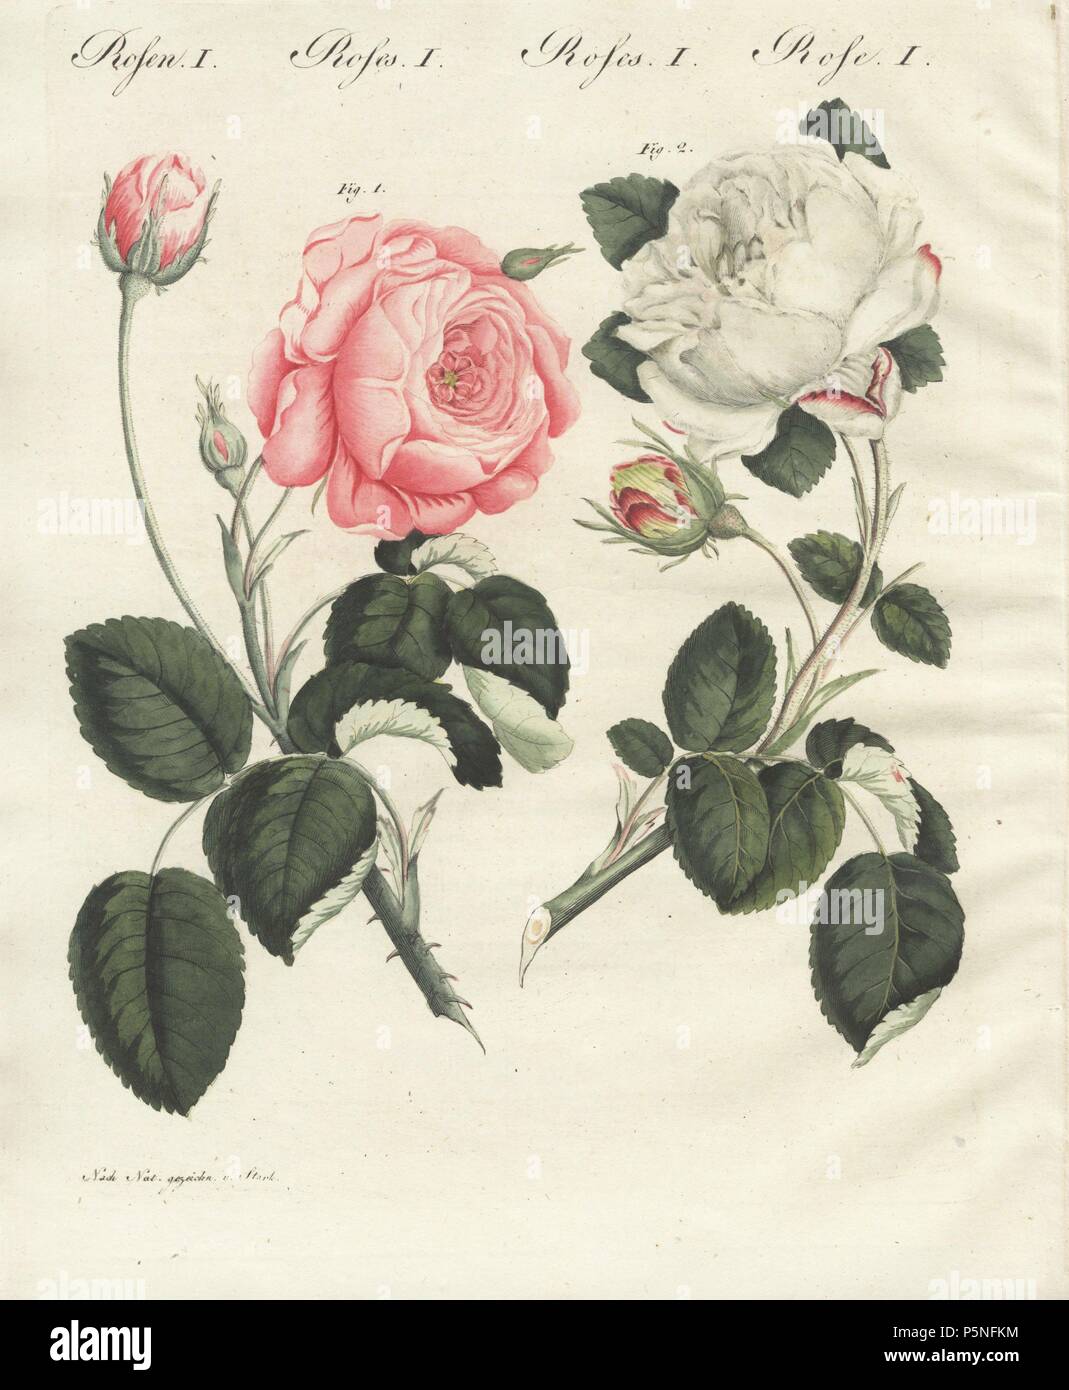 Pink German centifolia rose, Rosa centifolia germanica, and white unique rose, Rosa unica. Handcoloured copperplate engraving from an illustration drawn from nature by Stark from Bertuch's 'Bilderbuch fur Kinder' (Picture Book for Children), Weimar, 1790-1830. Friedrich Johann Bertuch (1747-1822) was a German publisher and man of arts most famous for his 12-volume encyclopedia for children illustrated with 1,200 engraved plates on natural history, science, costume, mythology, etc. Stock Photo